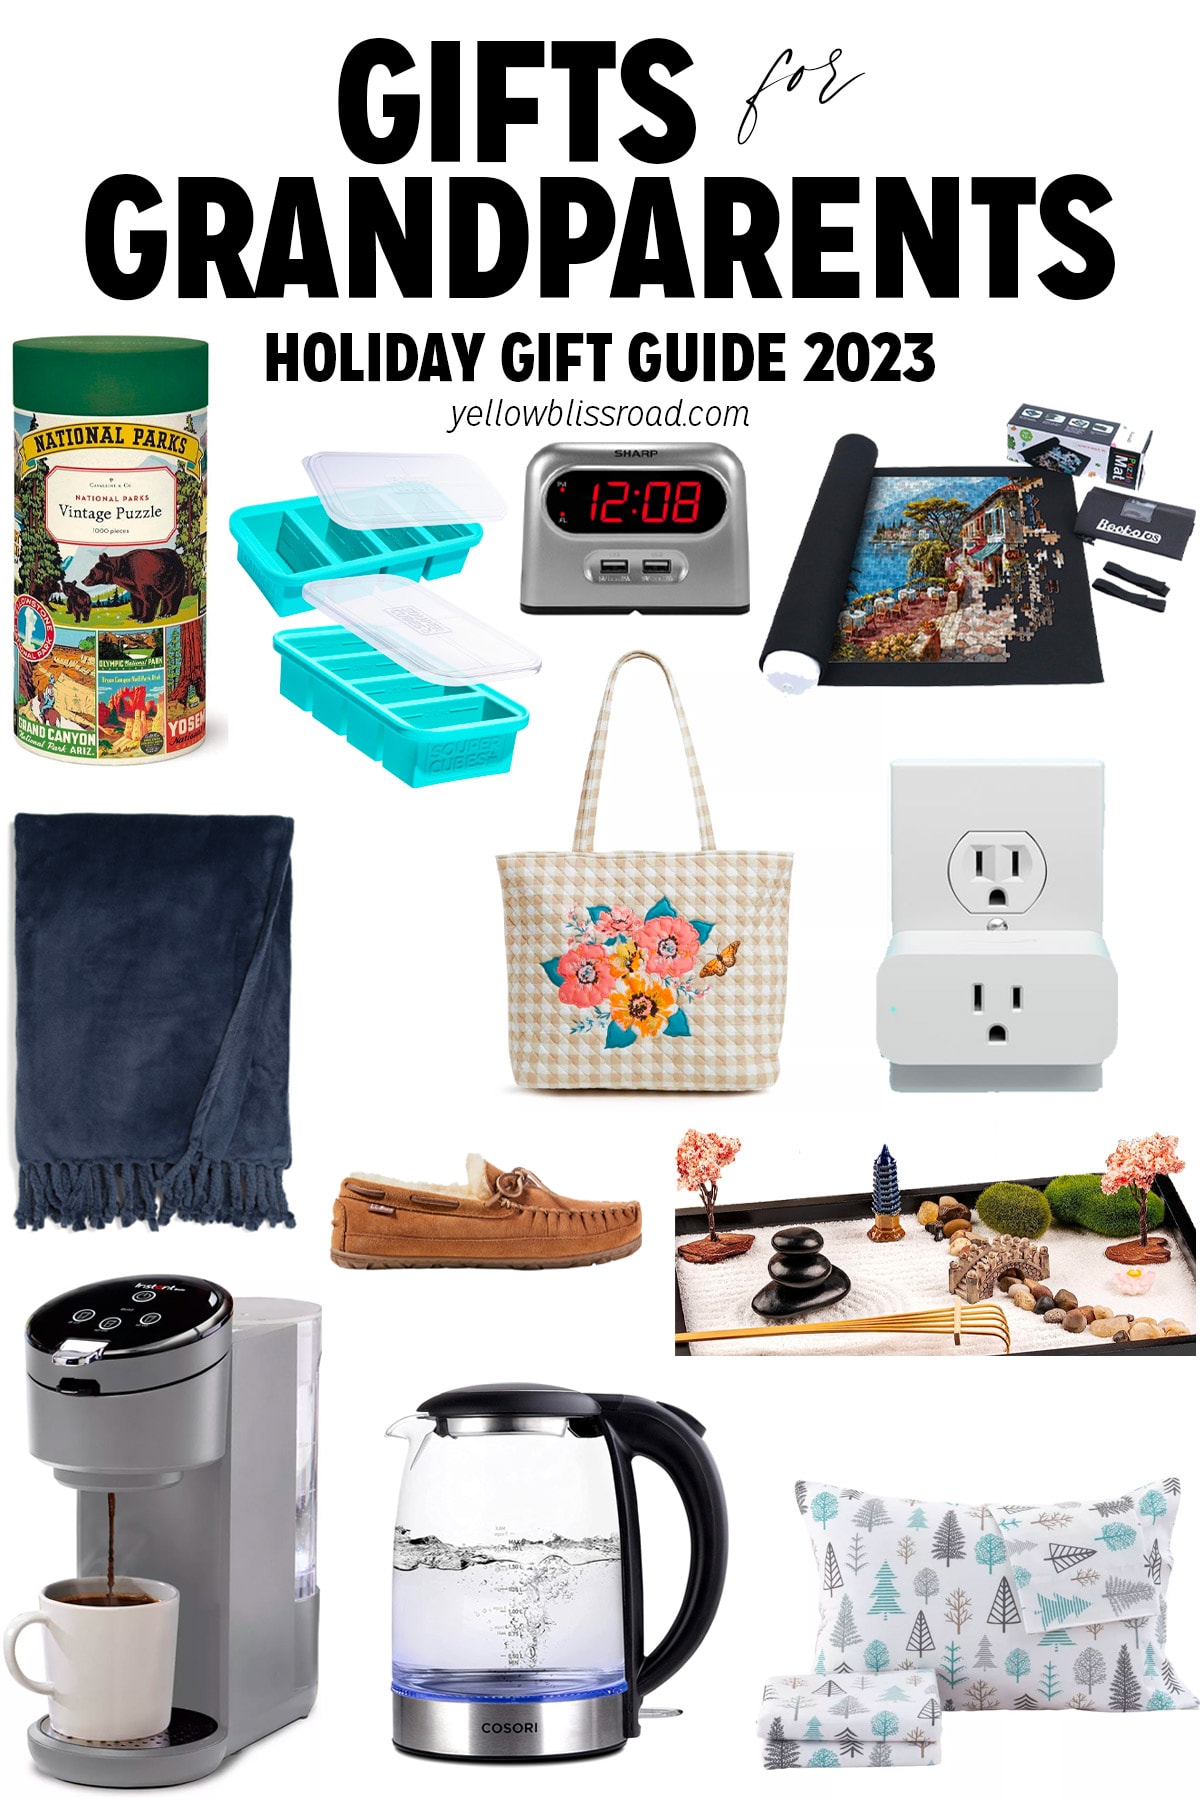 2023 Holiday Gift Guide  Best Gift Ideas for All Budgets!